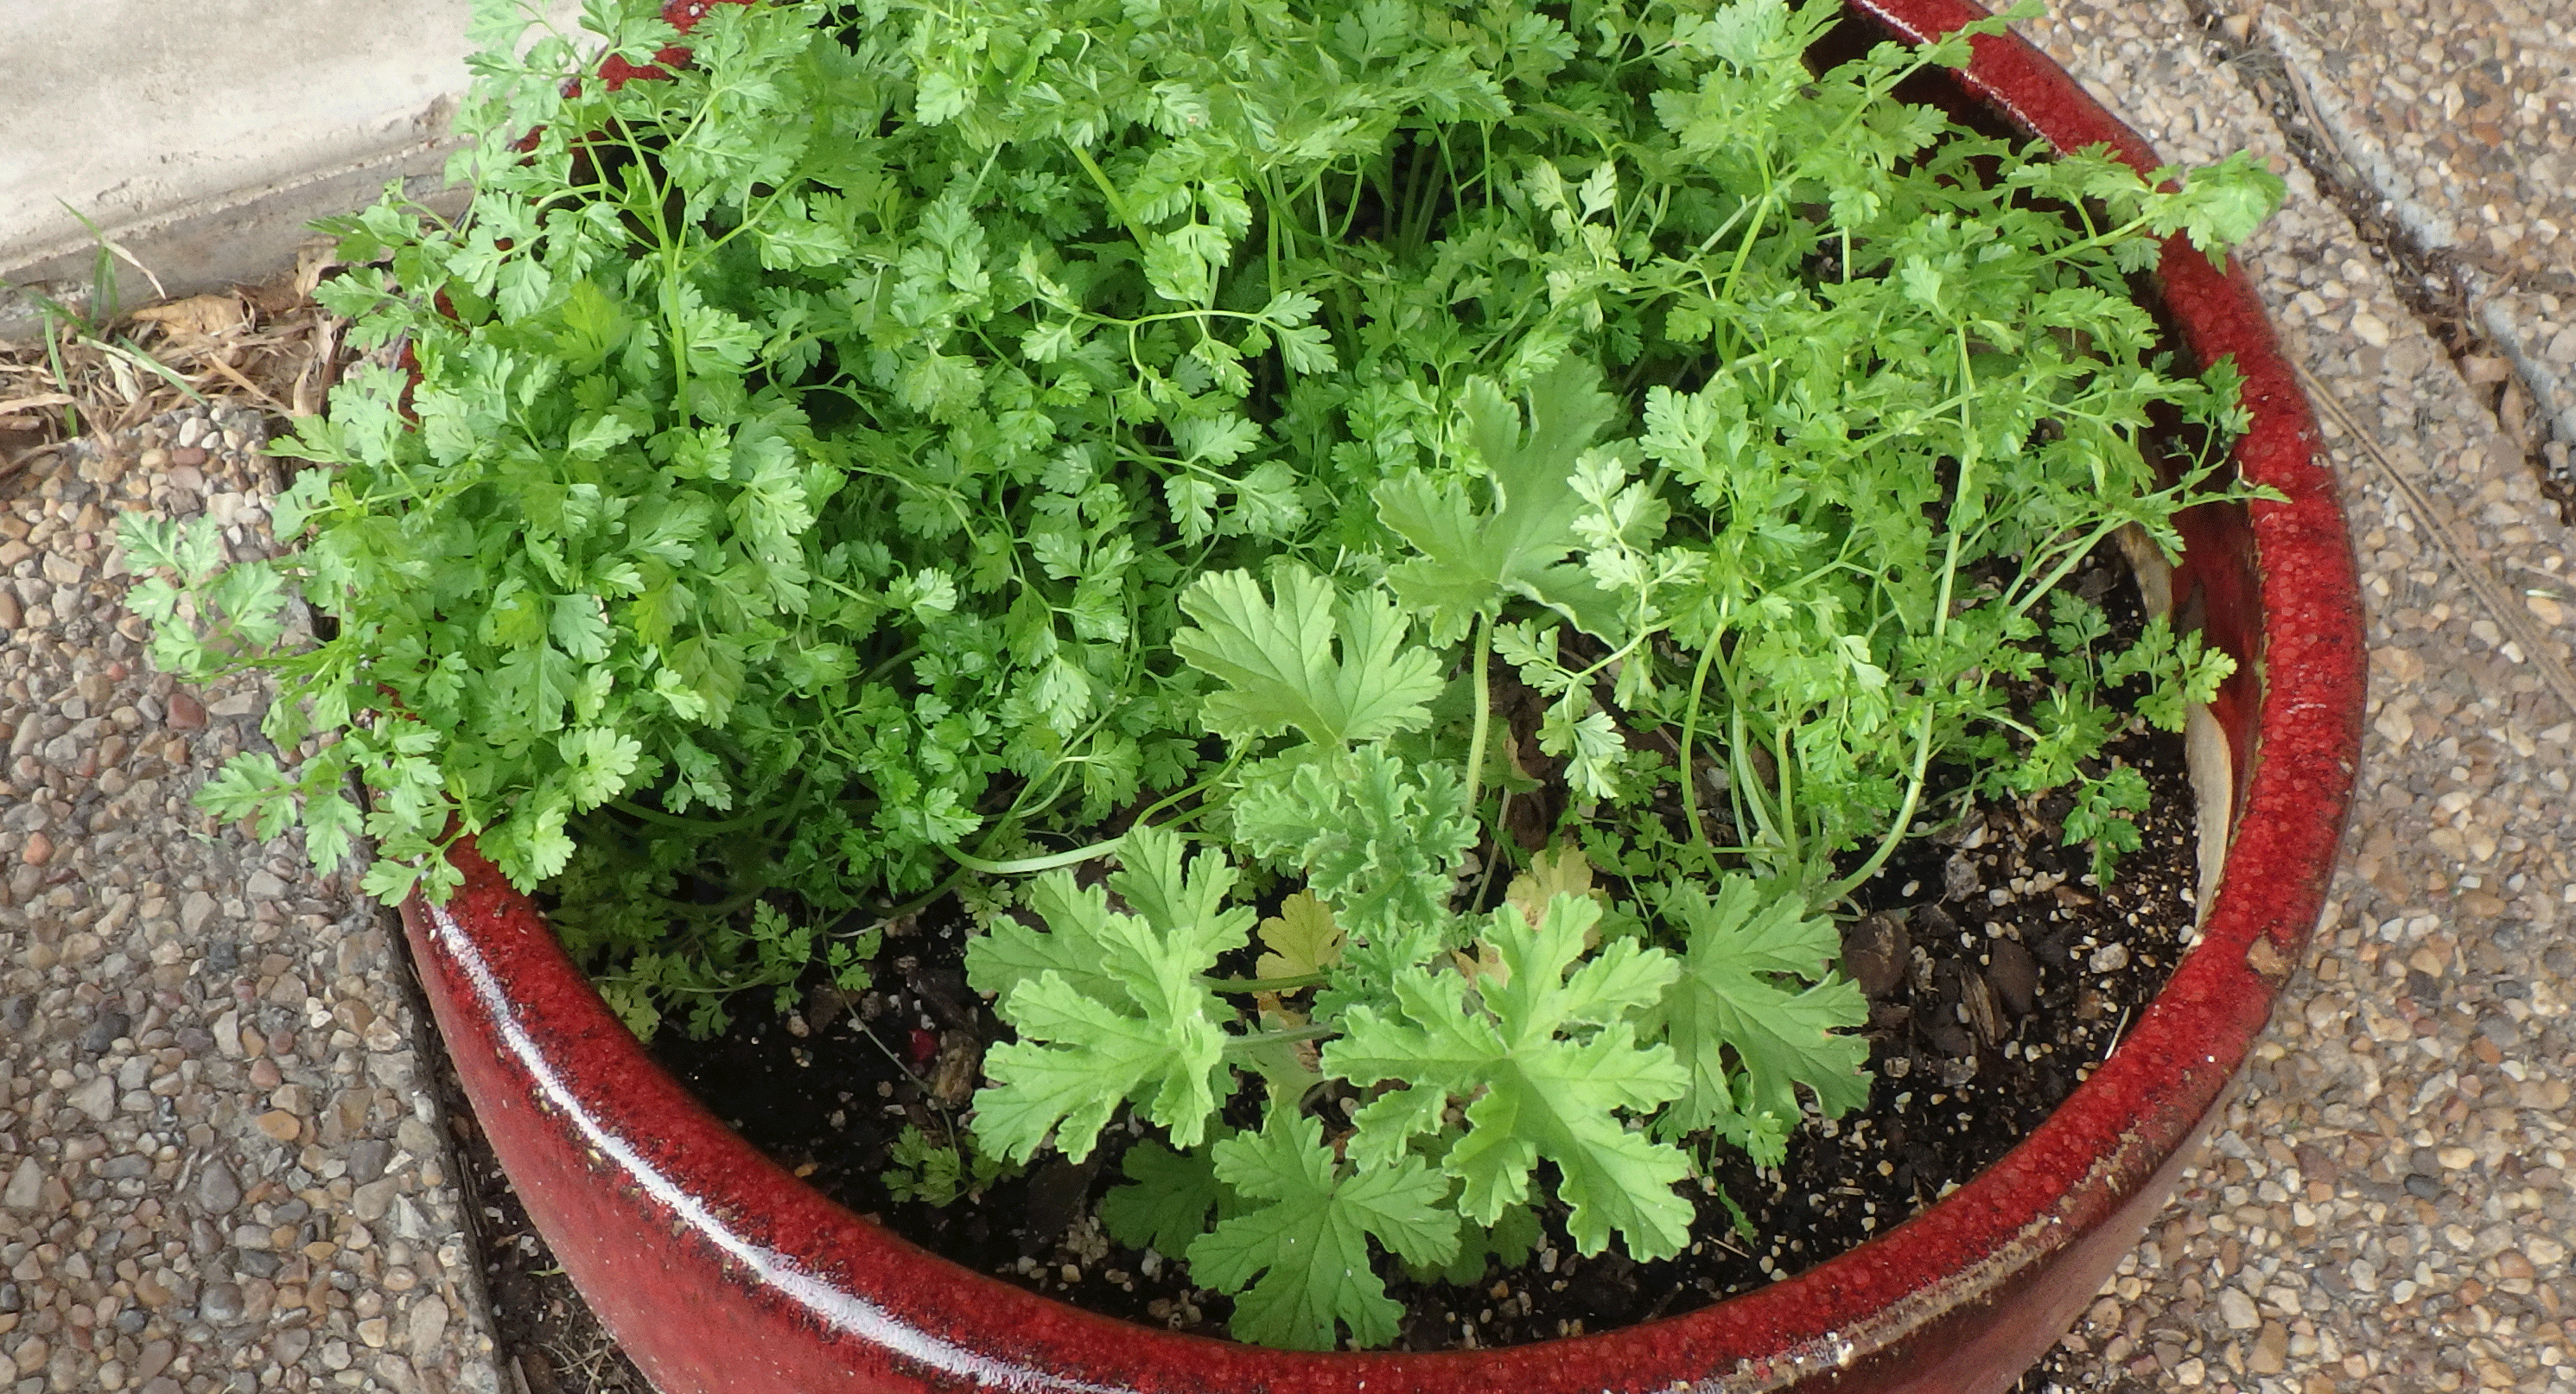 The young rose scented geranium in the front of this pot came up from last years root ball that overwintered on our porch. The young herbs in the back of the pot are chervil, something I haven't grown in several years. Chervil is more commonly used in French cuisine than here in America.